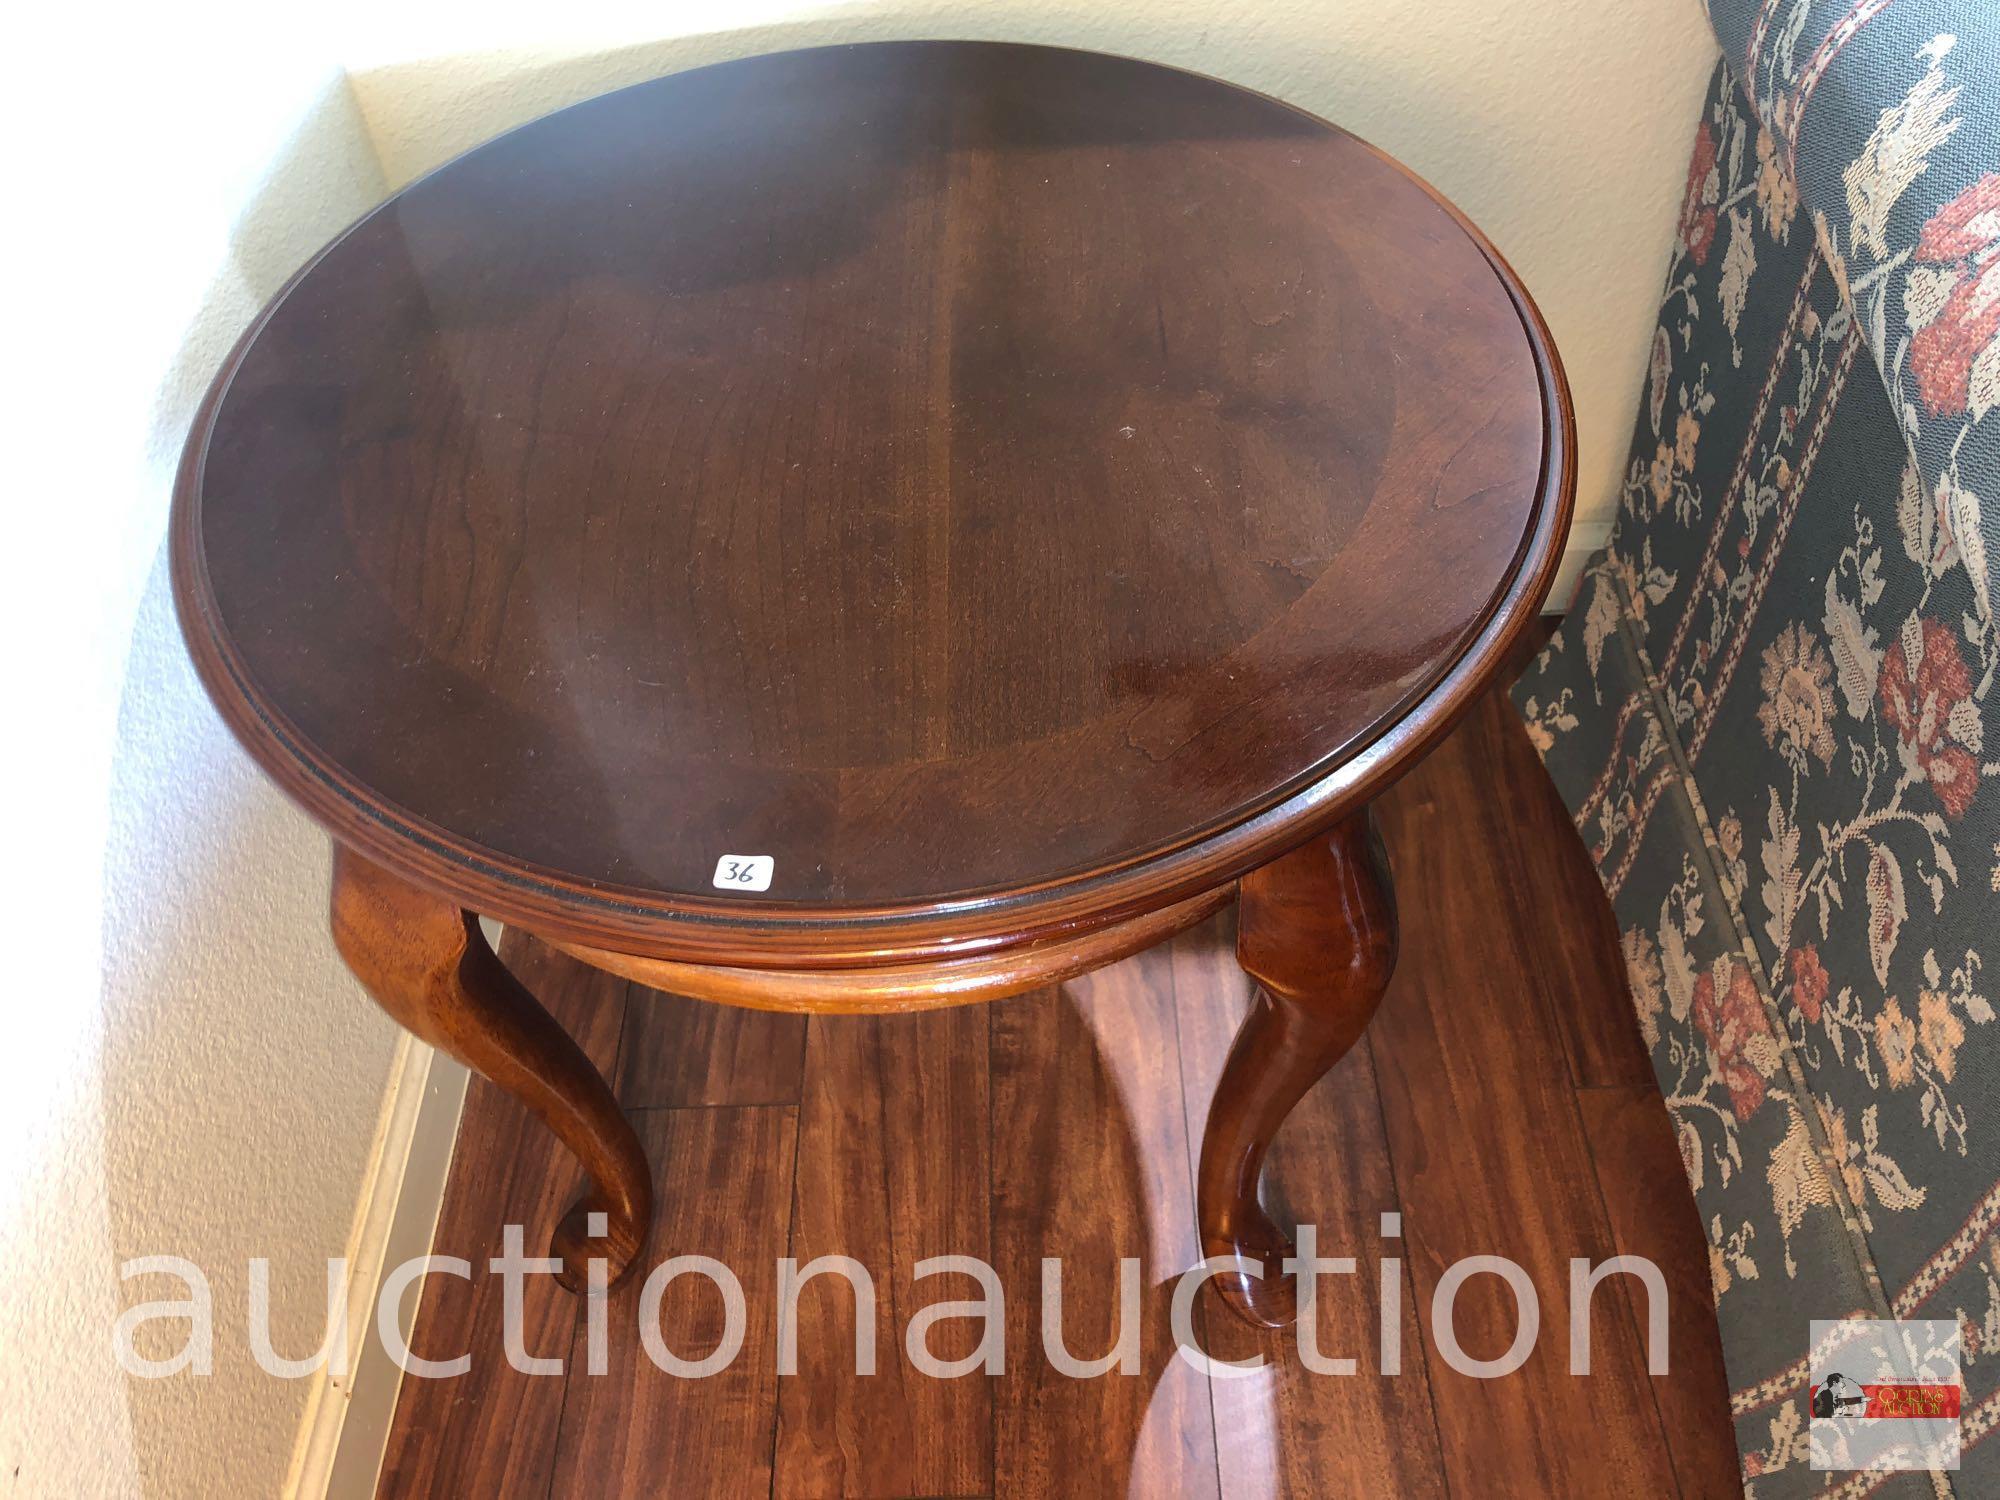 Furniture - Round end table, Queen Anne legs, 24"wx21"h